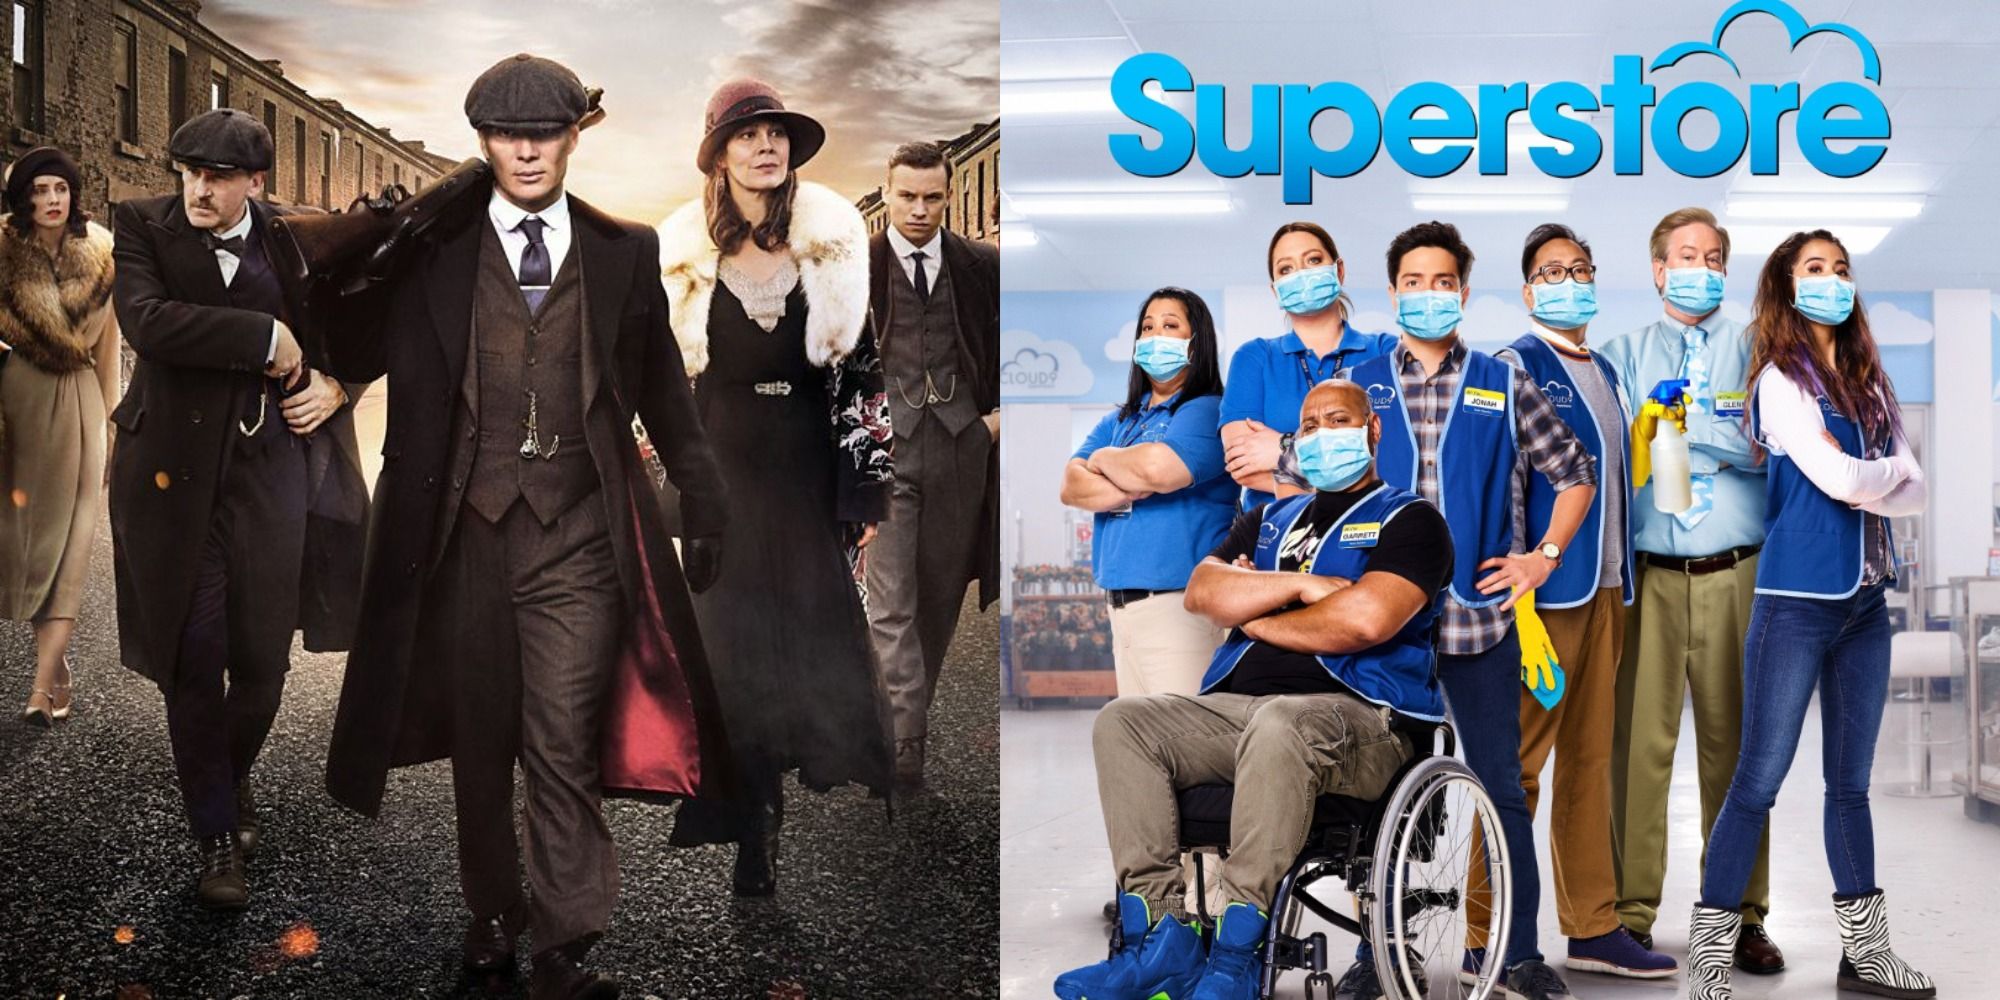 10 Most Upsetting 2021 TV Cancellations According To Reddit